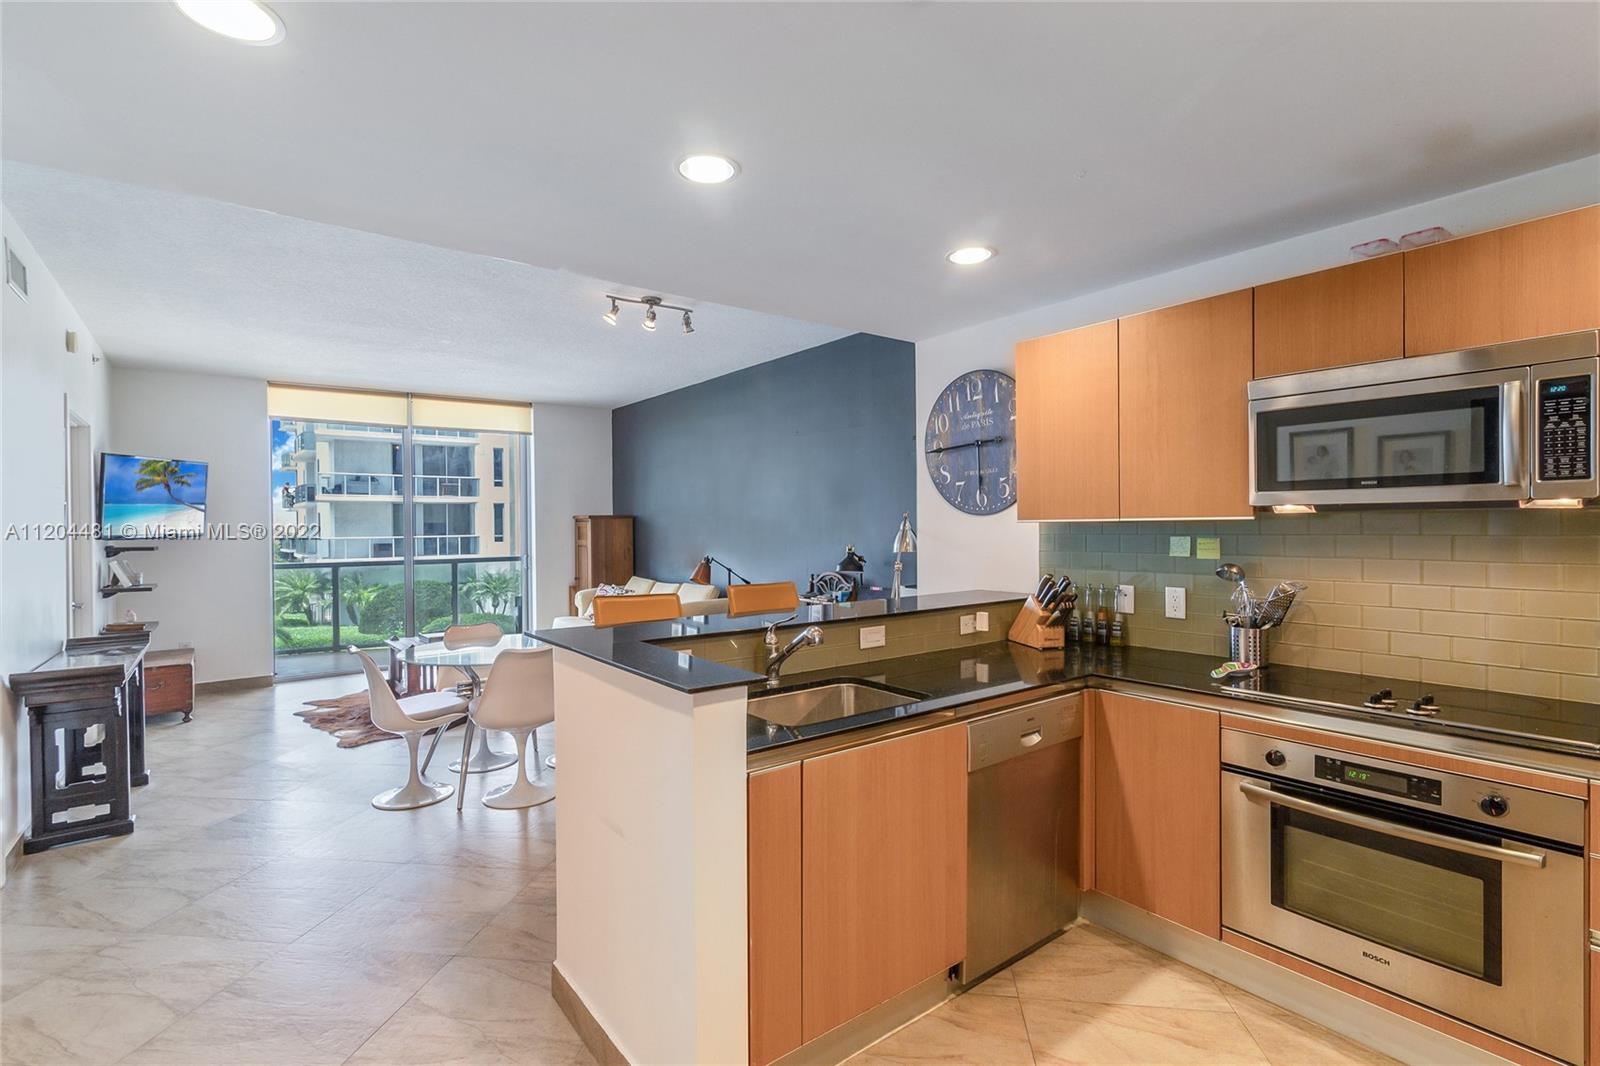 Beautiful Furnished apartment on Brickell Ave. Porcelain floors, Gourmet Open Kitchen format, Washer/Dryer, Pool View and towel Service. Great amenities including Pool Room, message room, virtual golf room, Gym, and Wine Room. Walking distance to Markets, Bars and Restaurants. Minutes from Metro Rail and Monorail. Common area deposit required by association and paid by landlord. Frist, last and Security deposit.